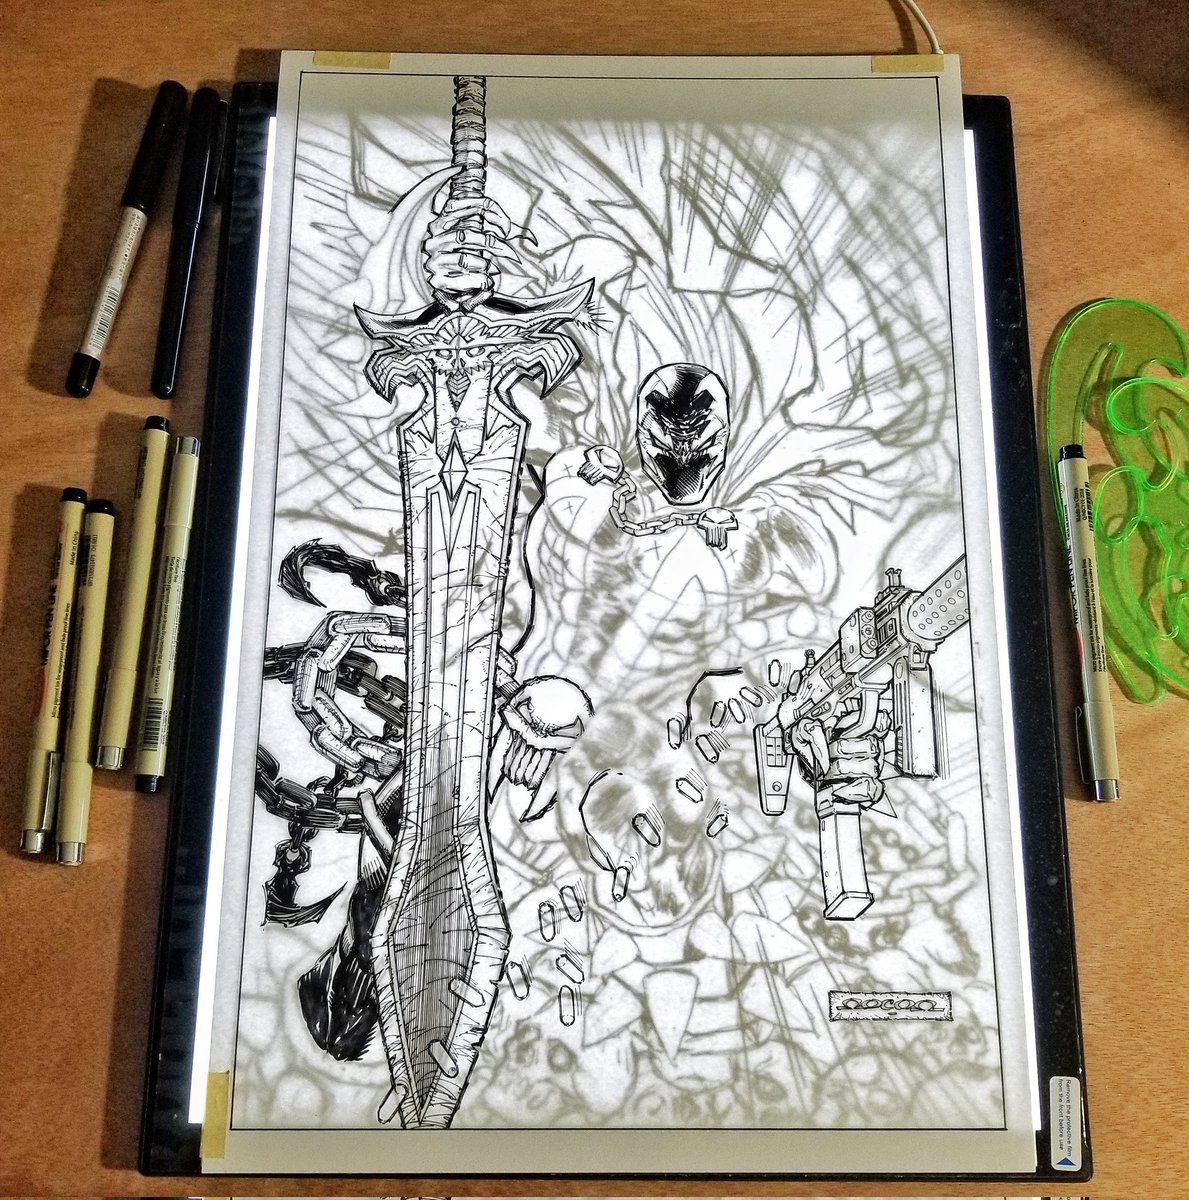 On the lightpad today. Art in progess.

#spawn #imagecomics #comics #comicart #comicbooks #comicbookart